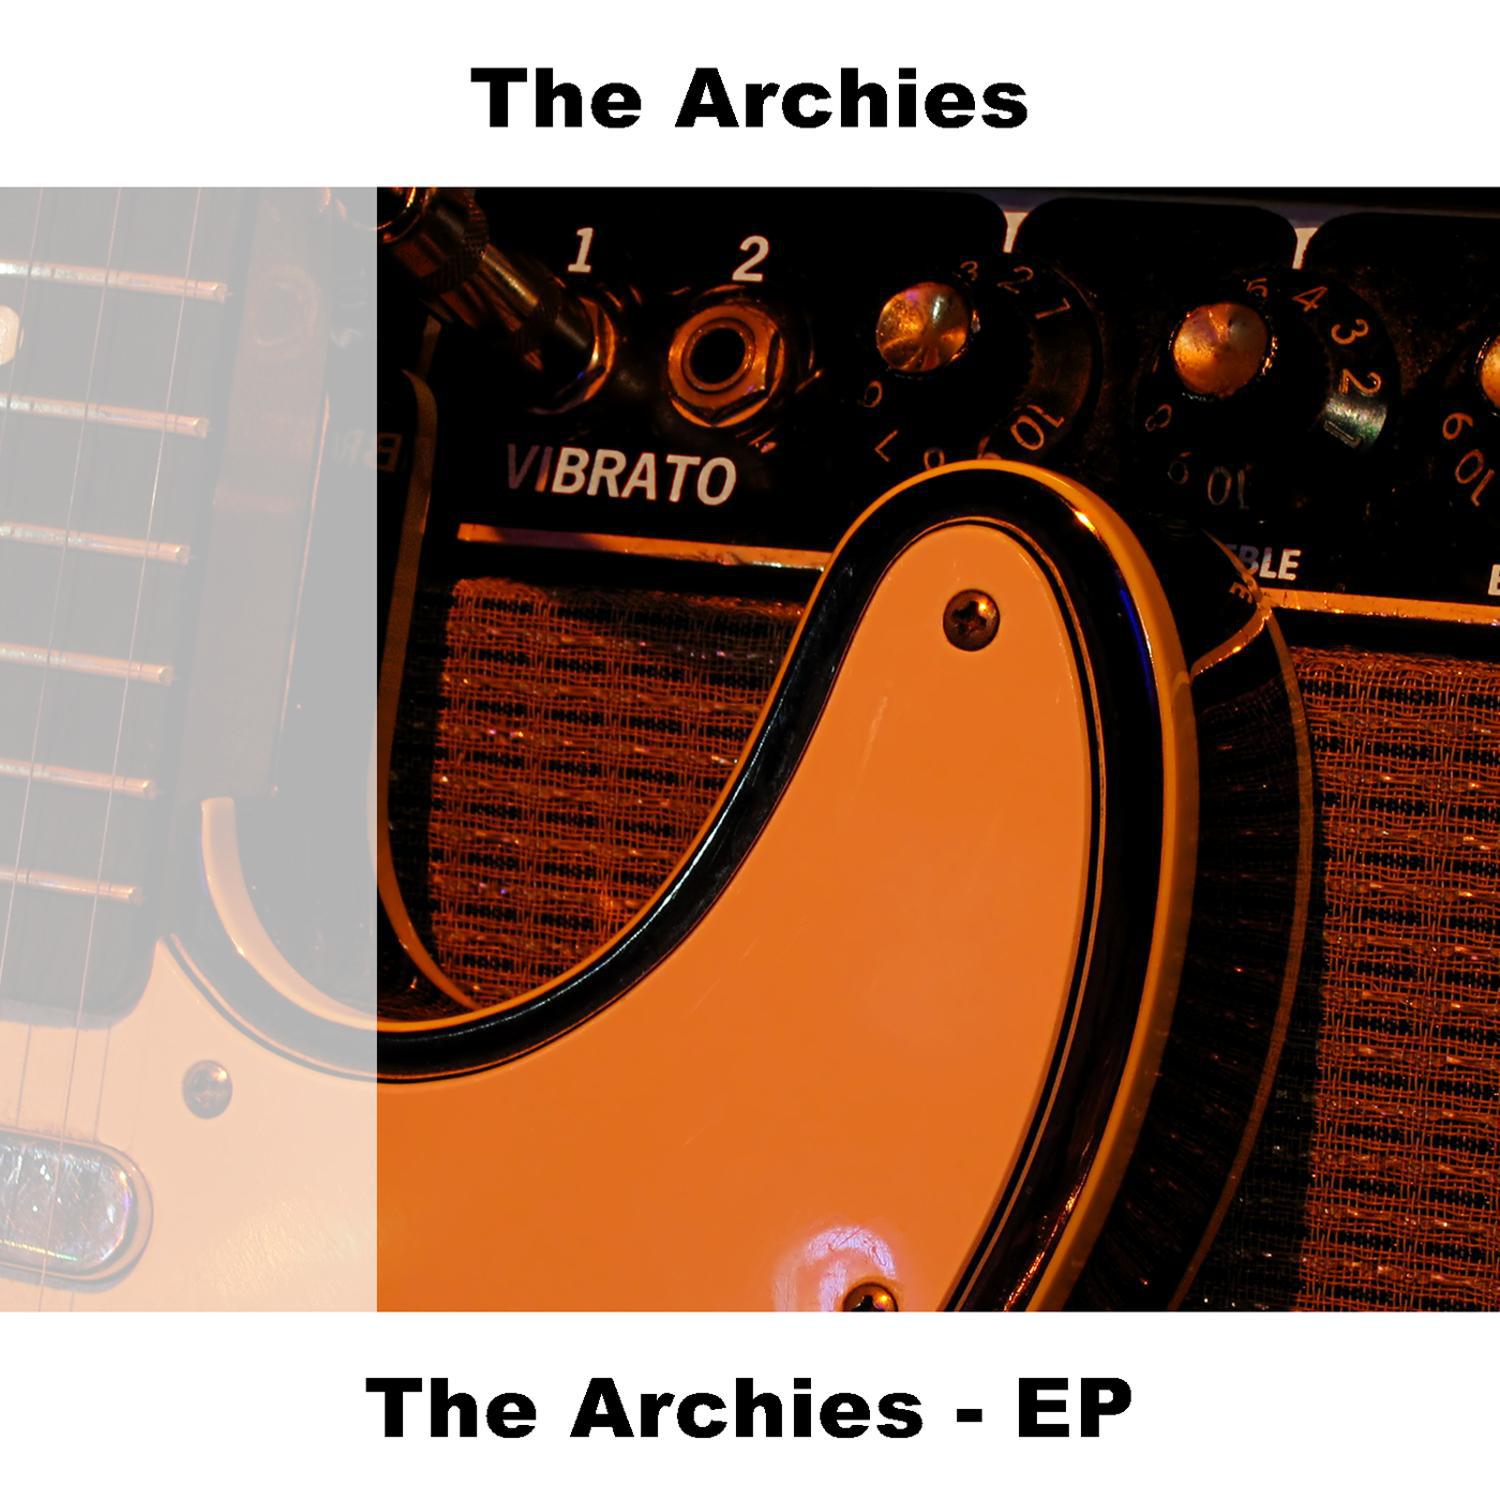 The Archies - EP专辑